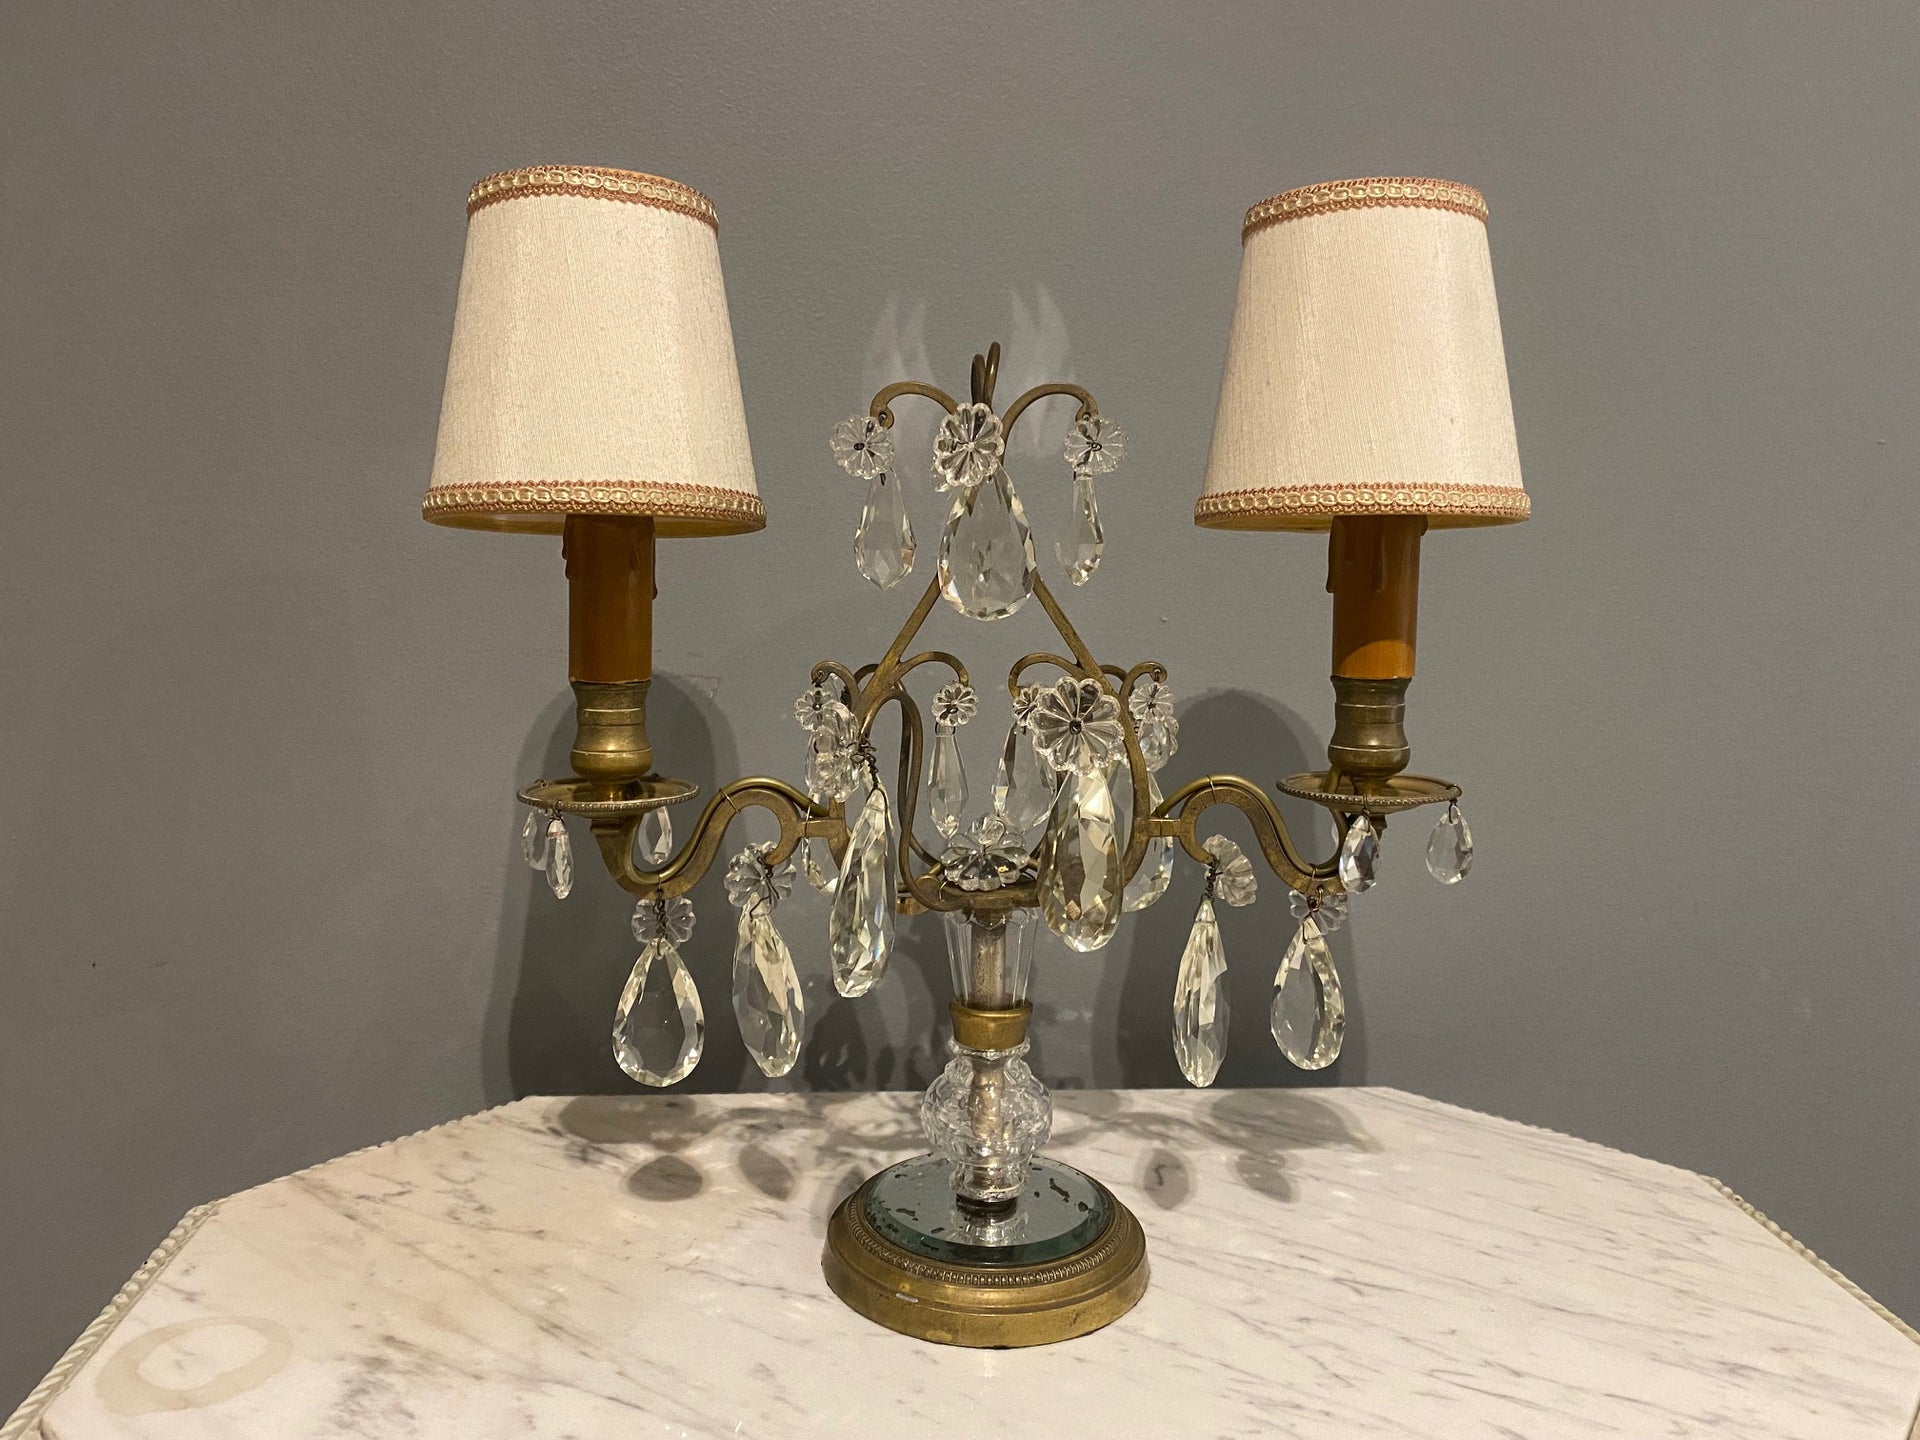 SOLD A beautiful pair of gilt bronze, cut crystal and mirror glass table chandelier lamps, French Circa 1950